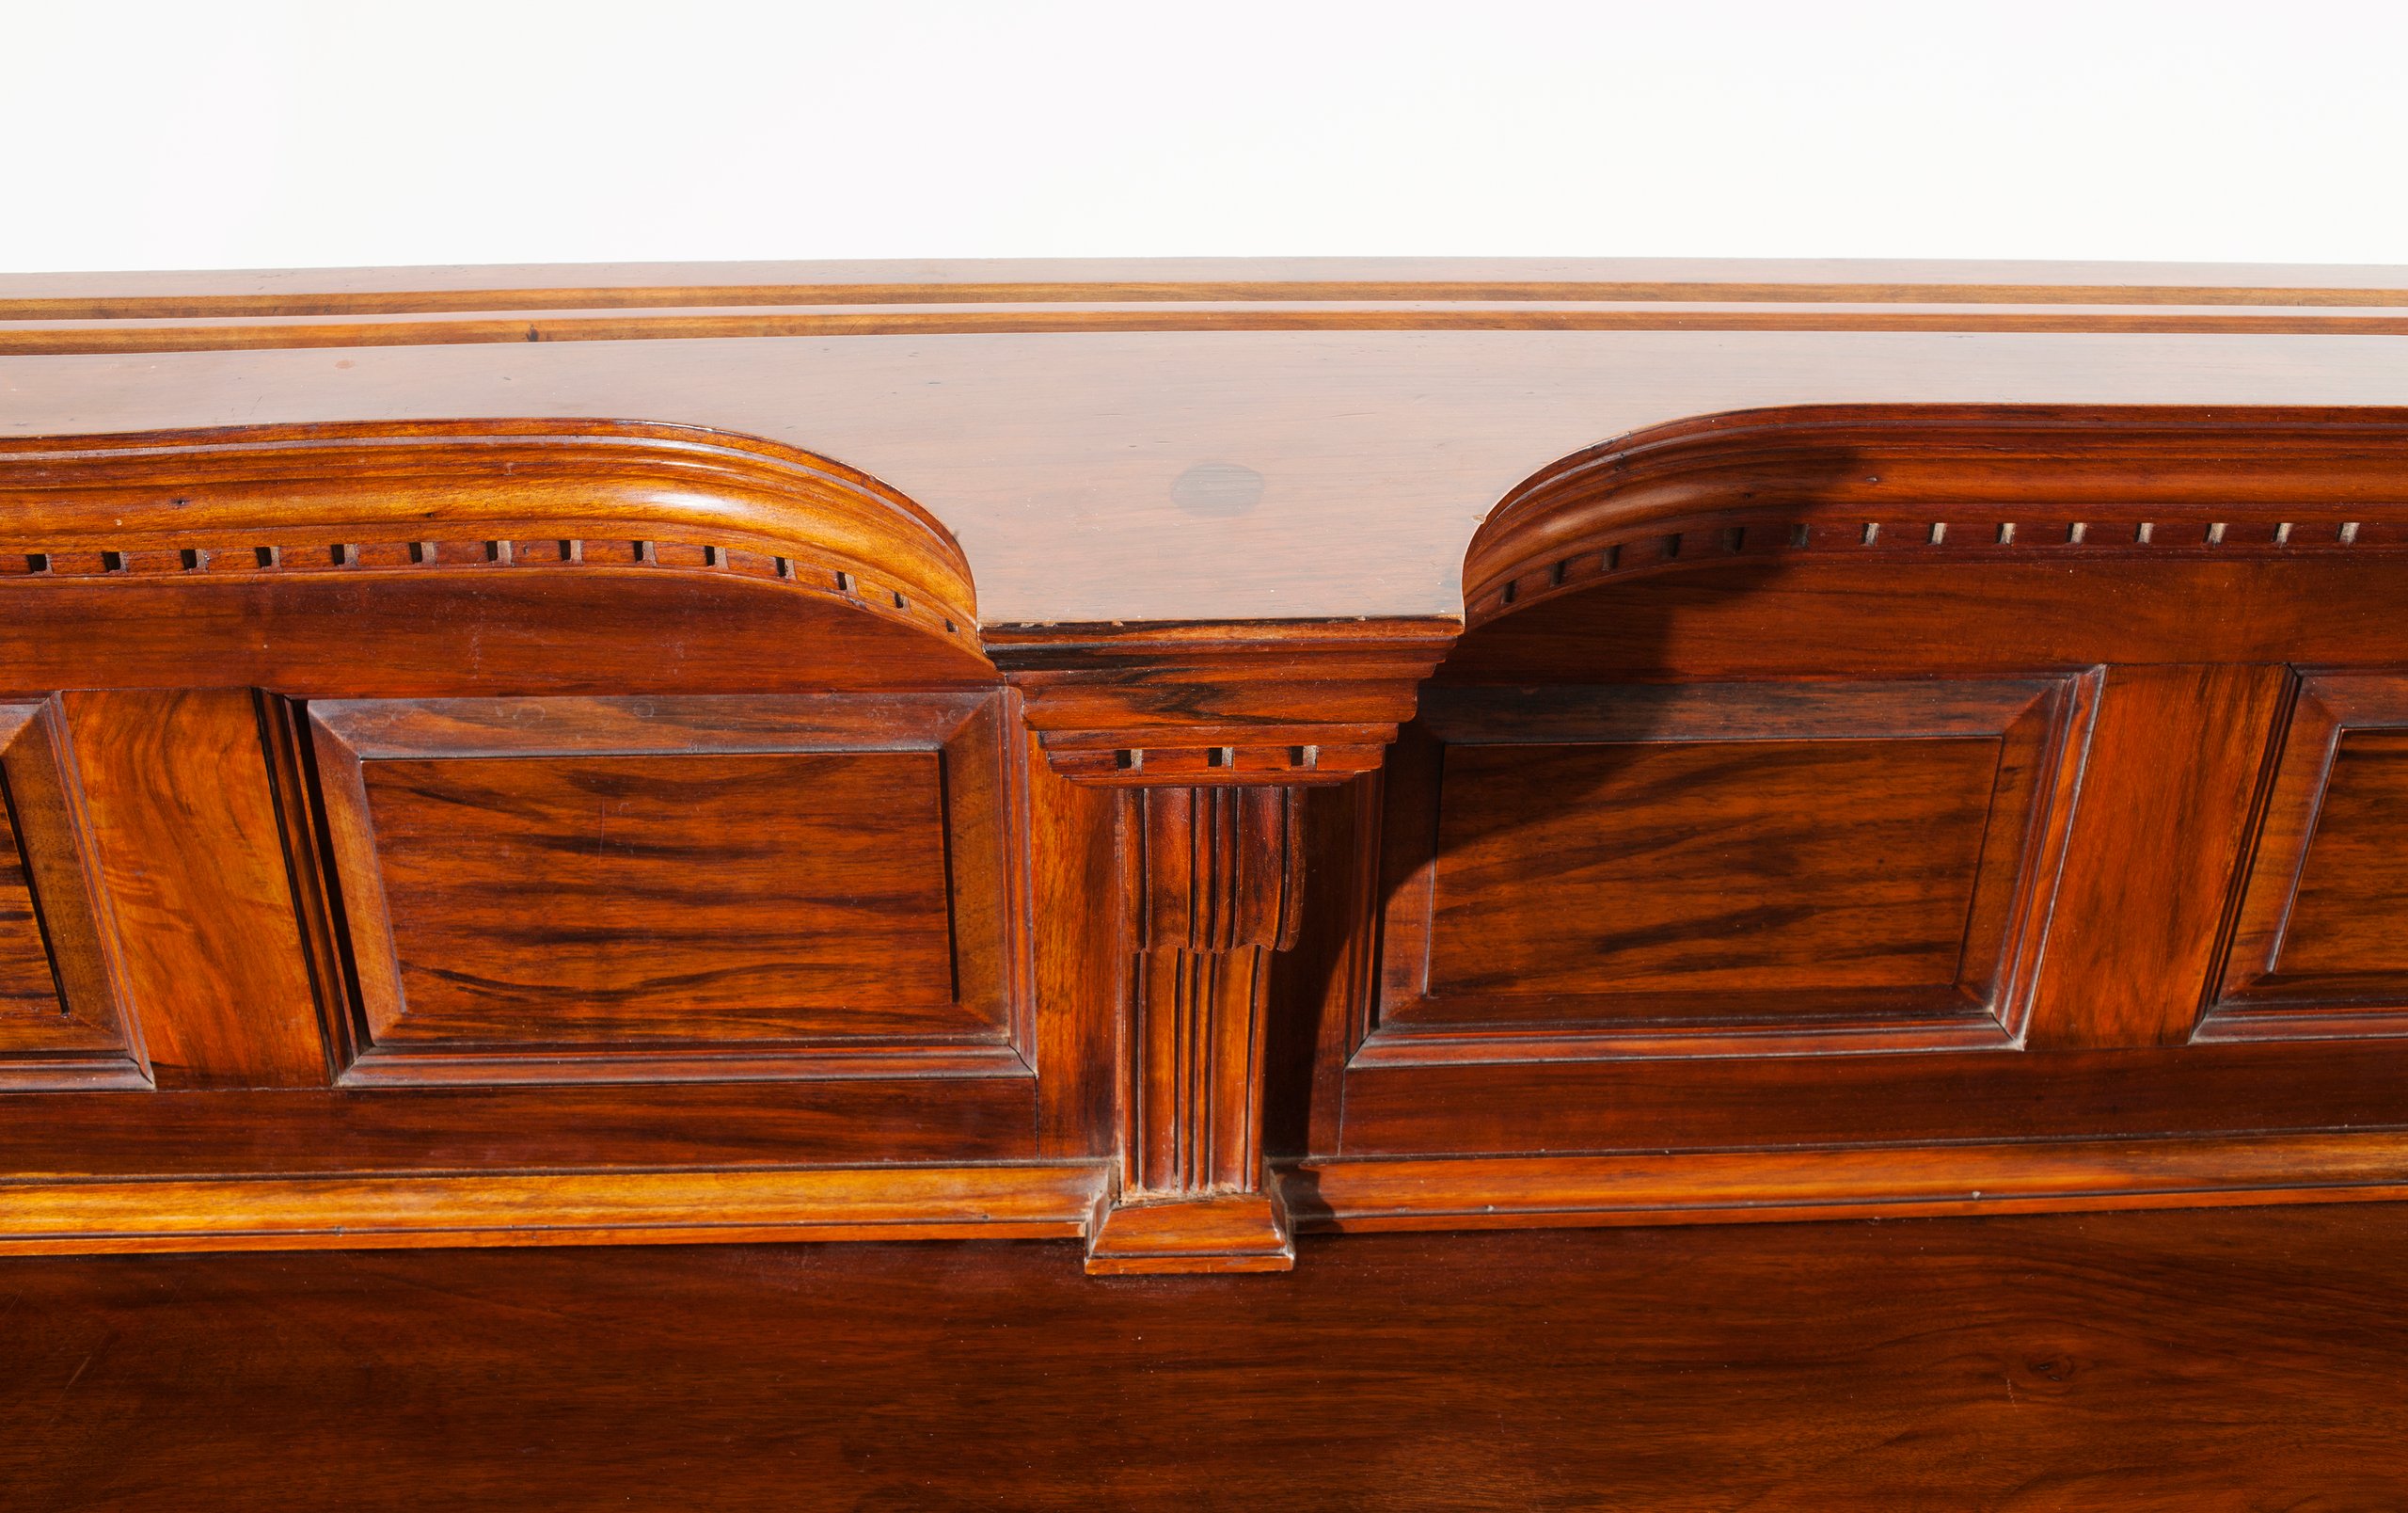 Cabinet by Morris & Co